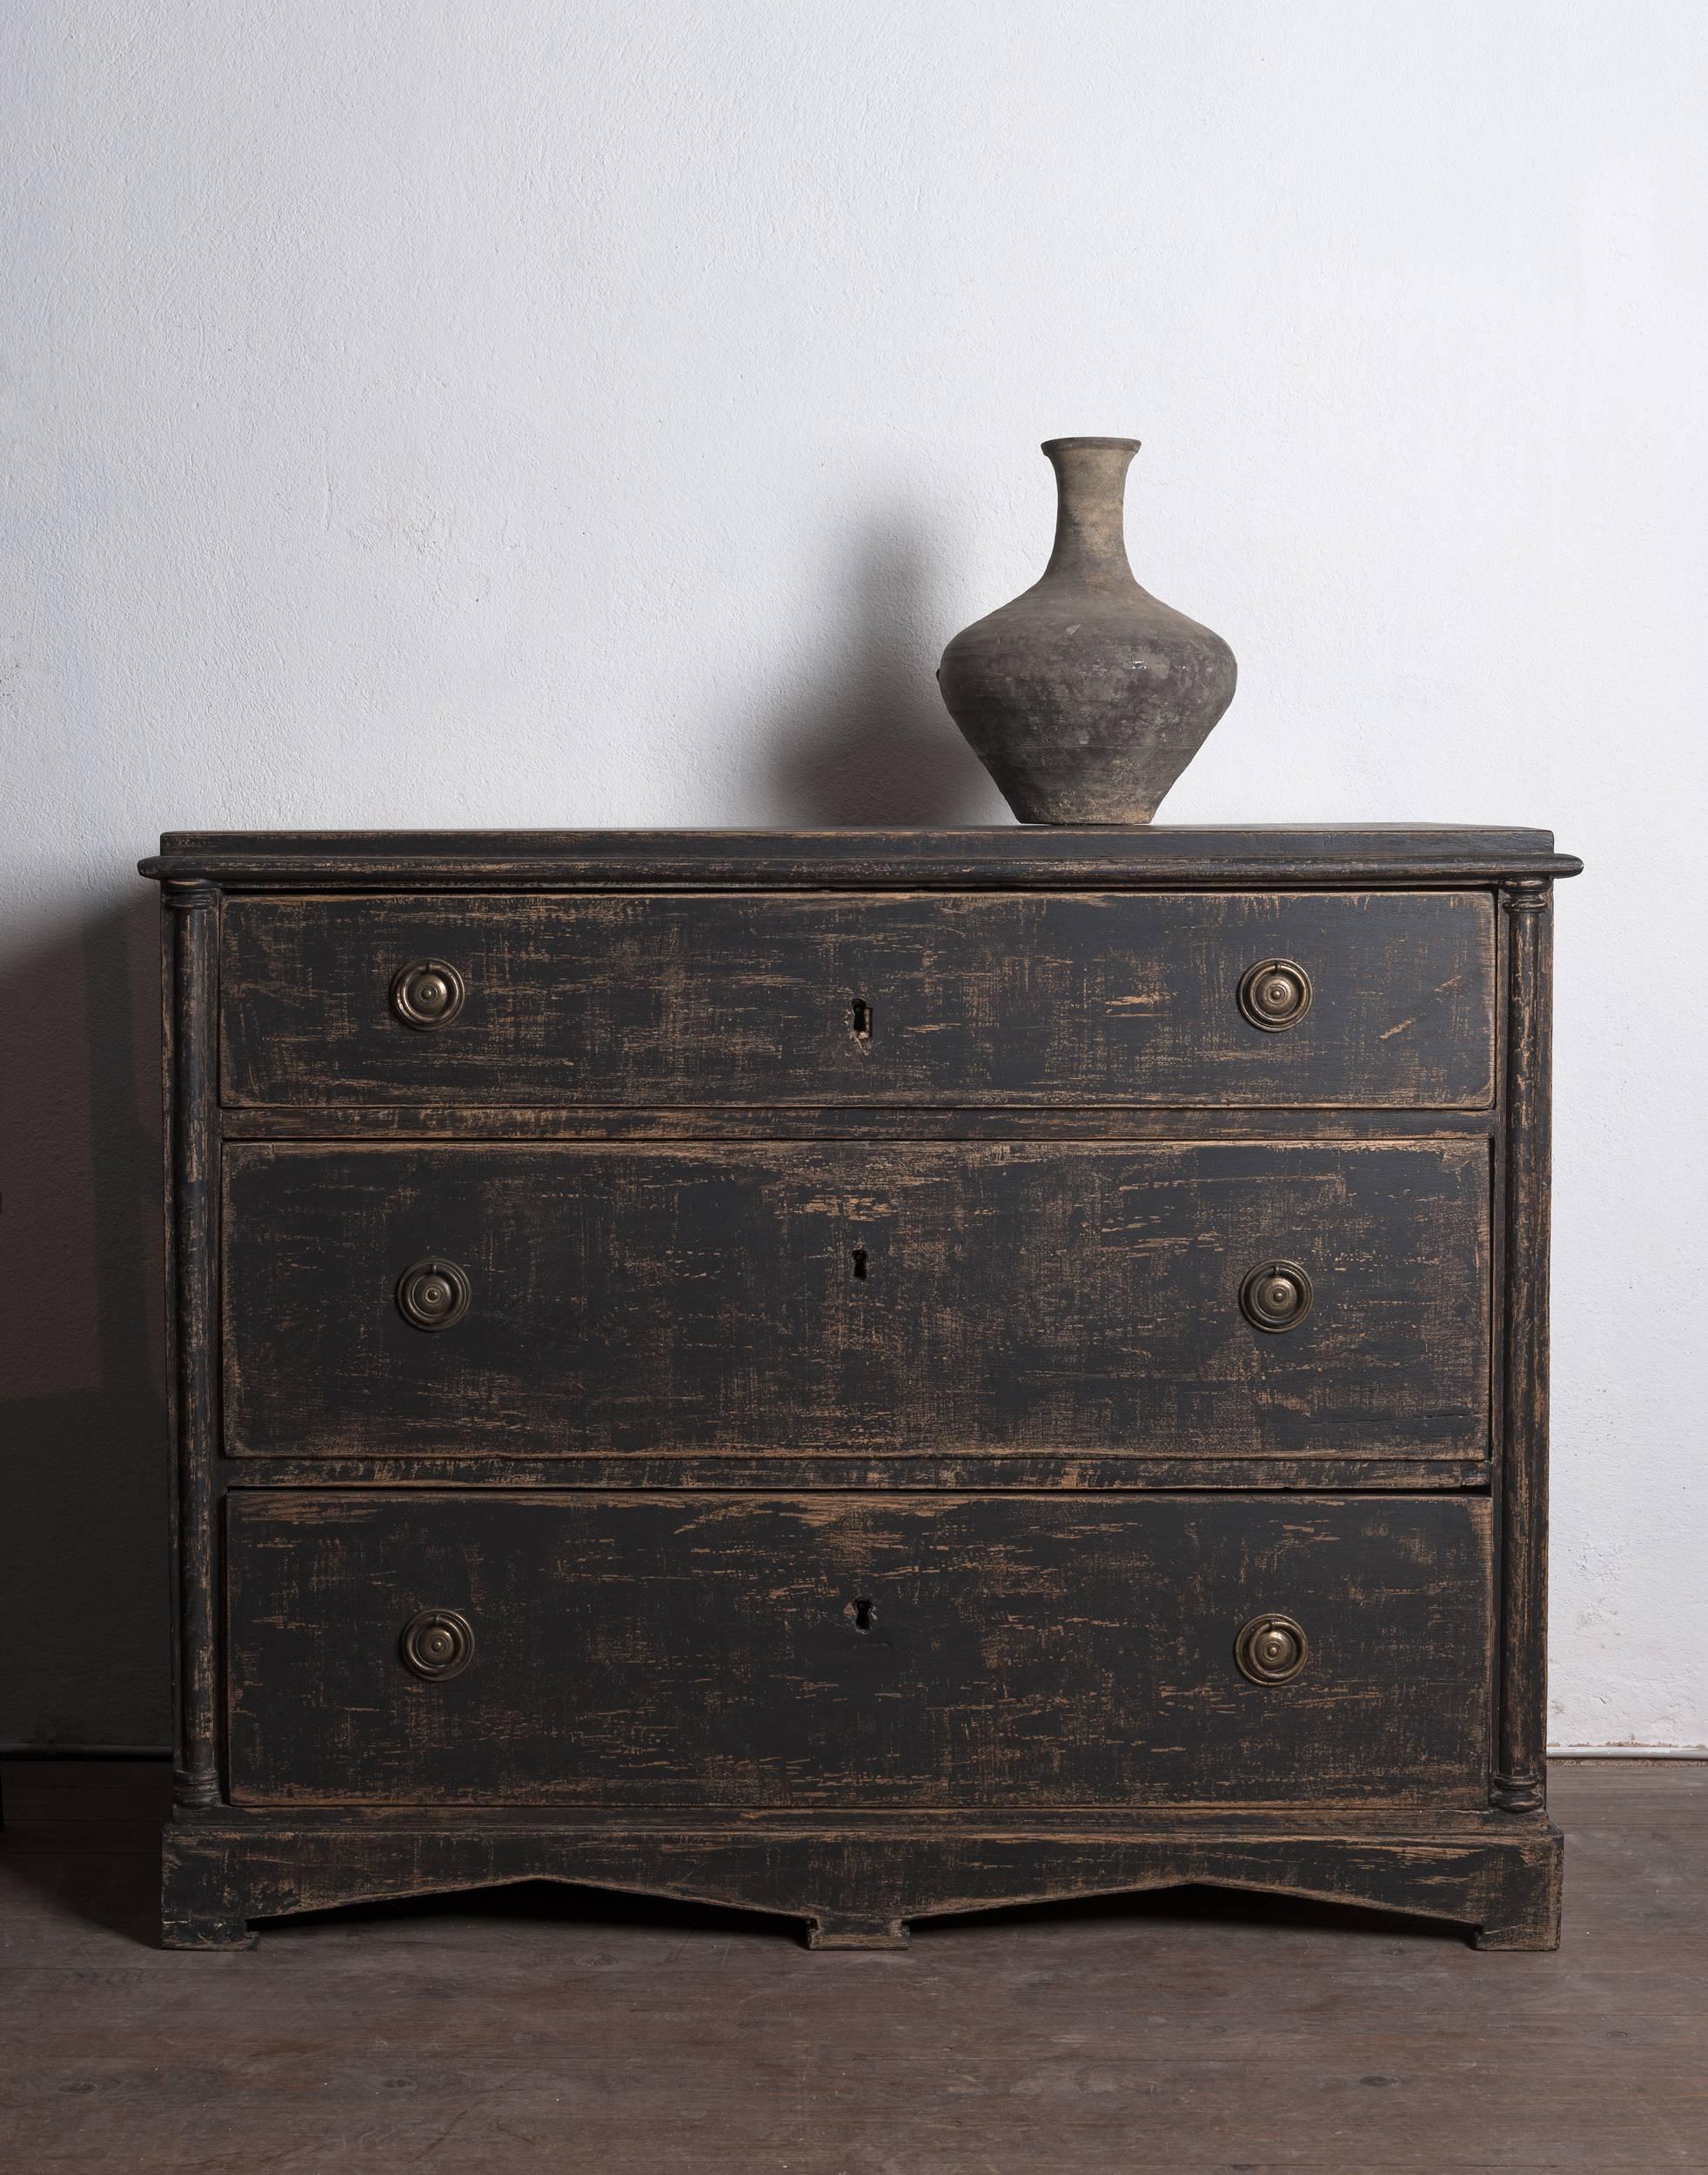 Elegant and simple Gustavian early 19th century black painted chest of drawers. Great proportions, patina. Would work well if combined with modern design, but also at home in a more traditional setting.
Paint old, but maybe touched up.